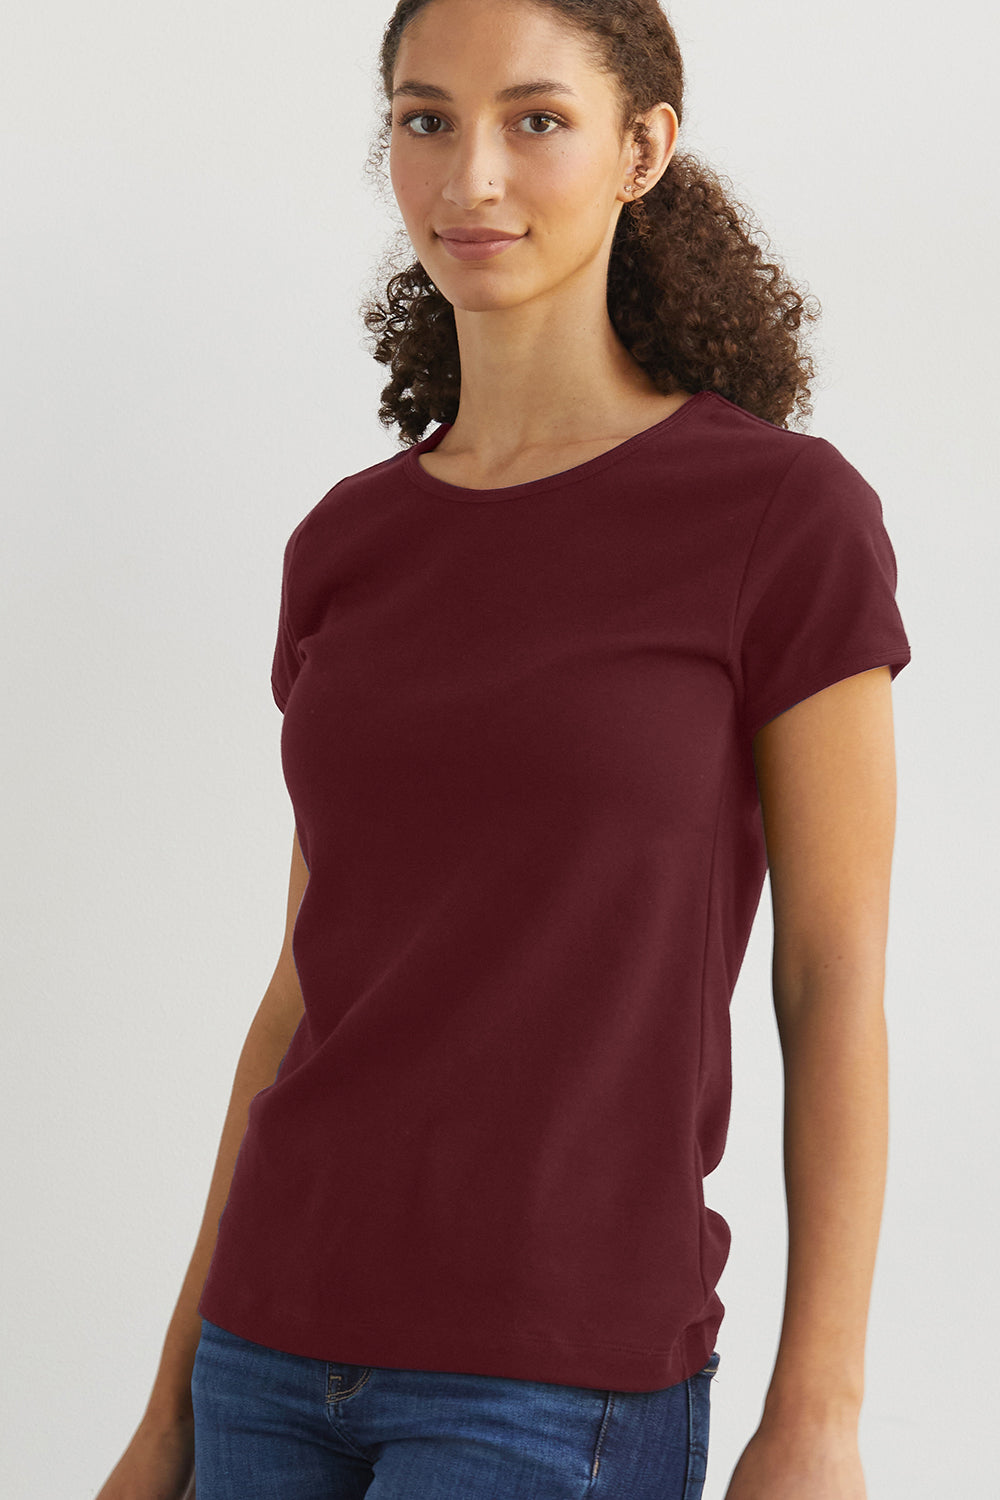 Women's Luxe 100% Organic Cotton Jewel Neck Tee (Discontinued Color)